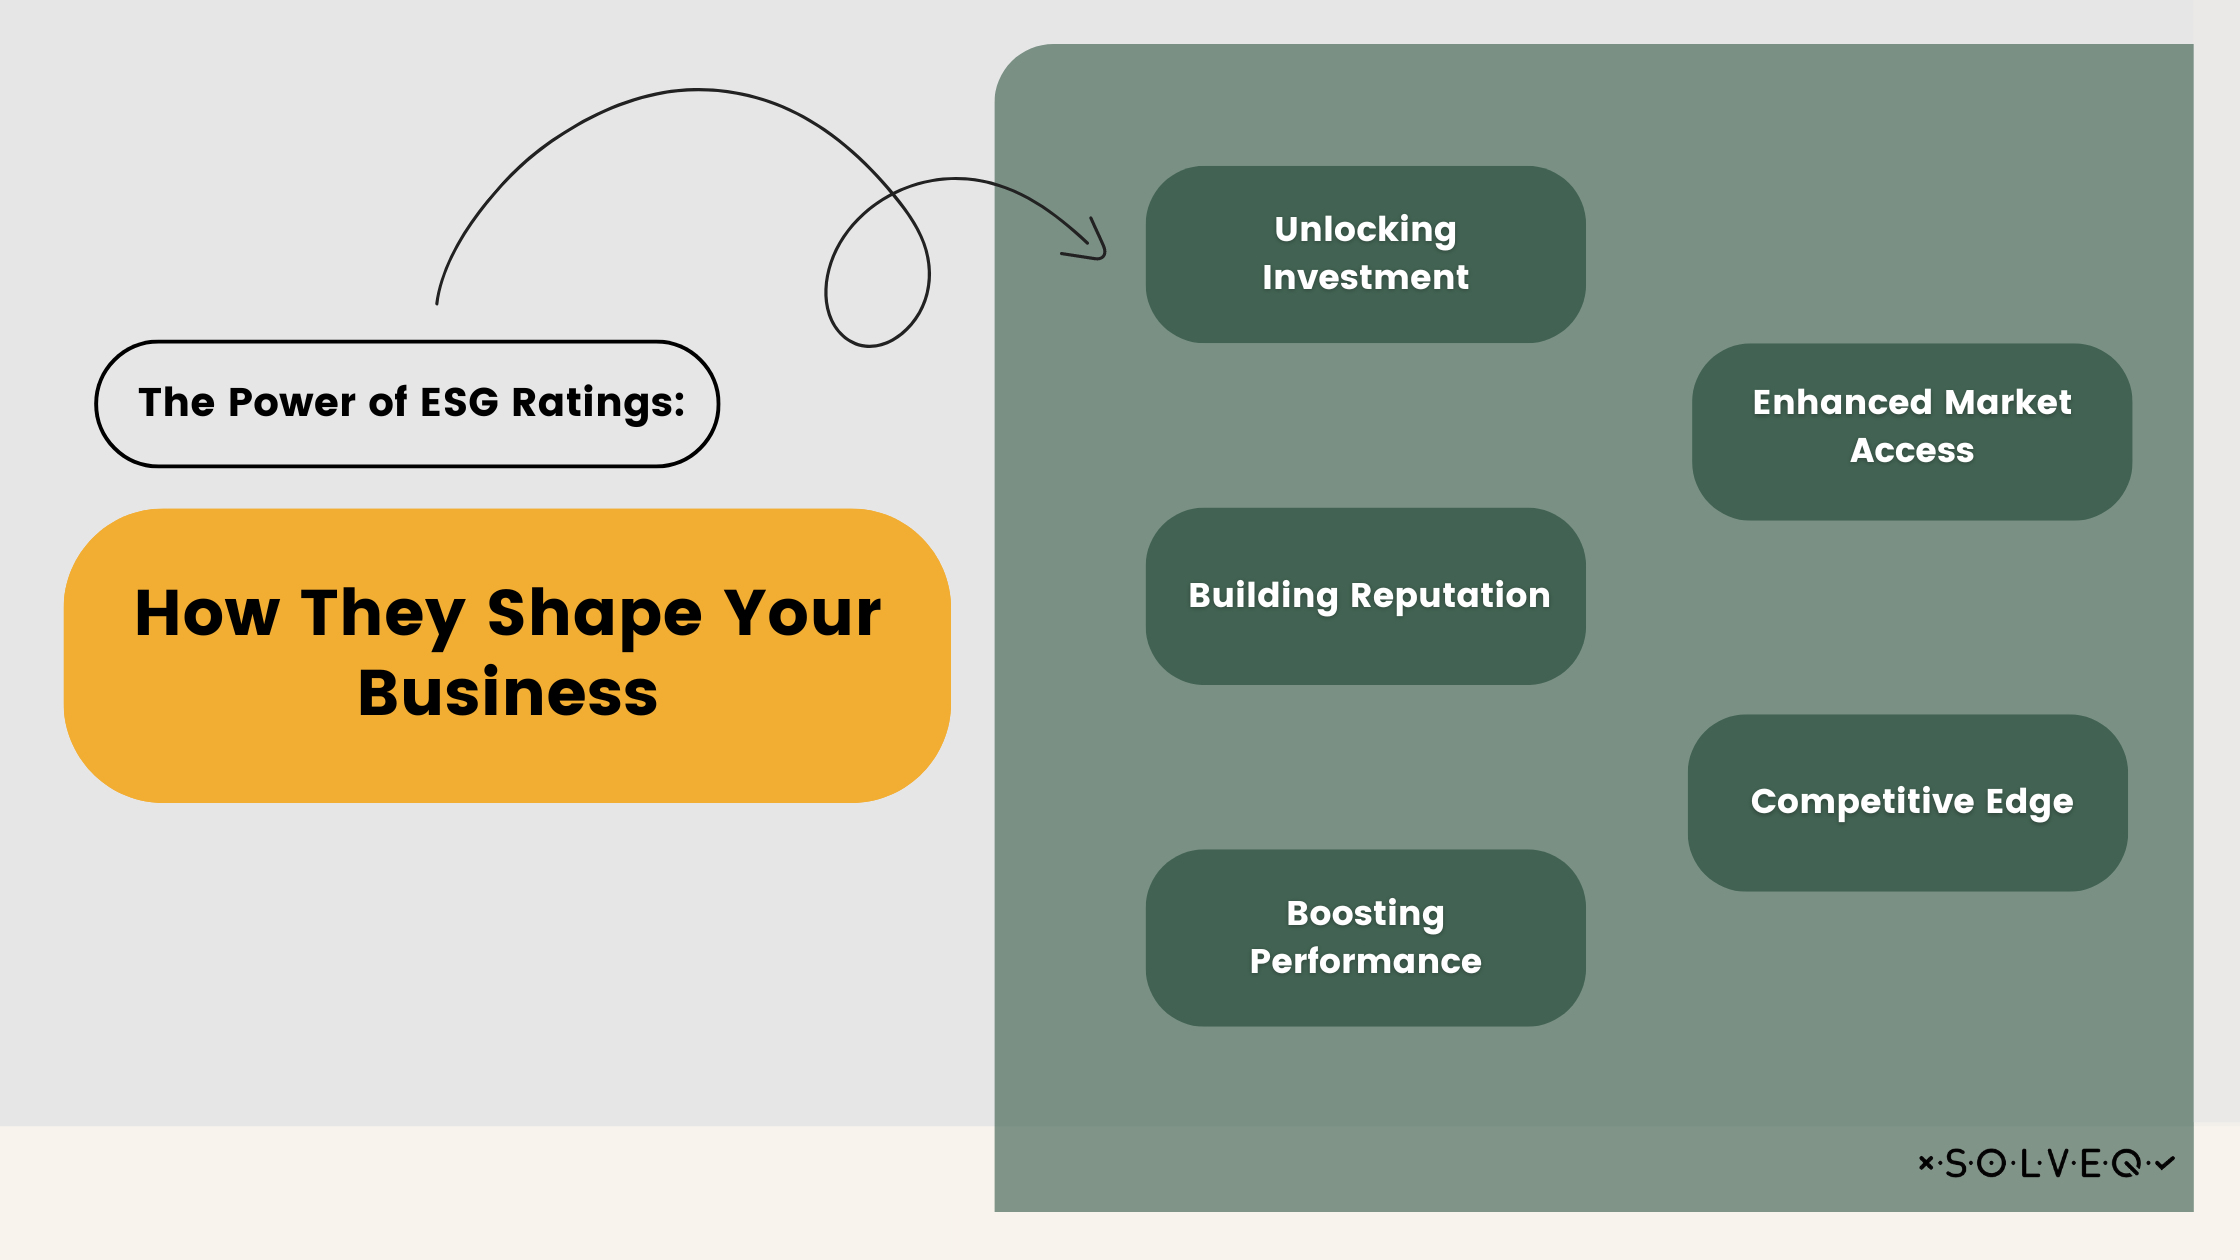 The Power of ESG Ratings: How They Shape Your Business